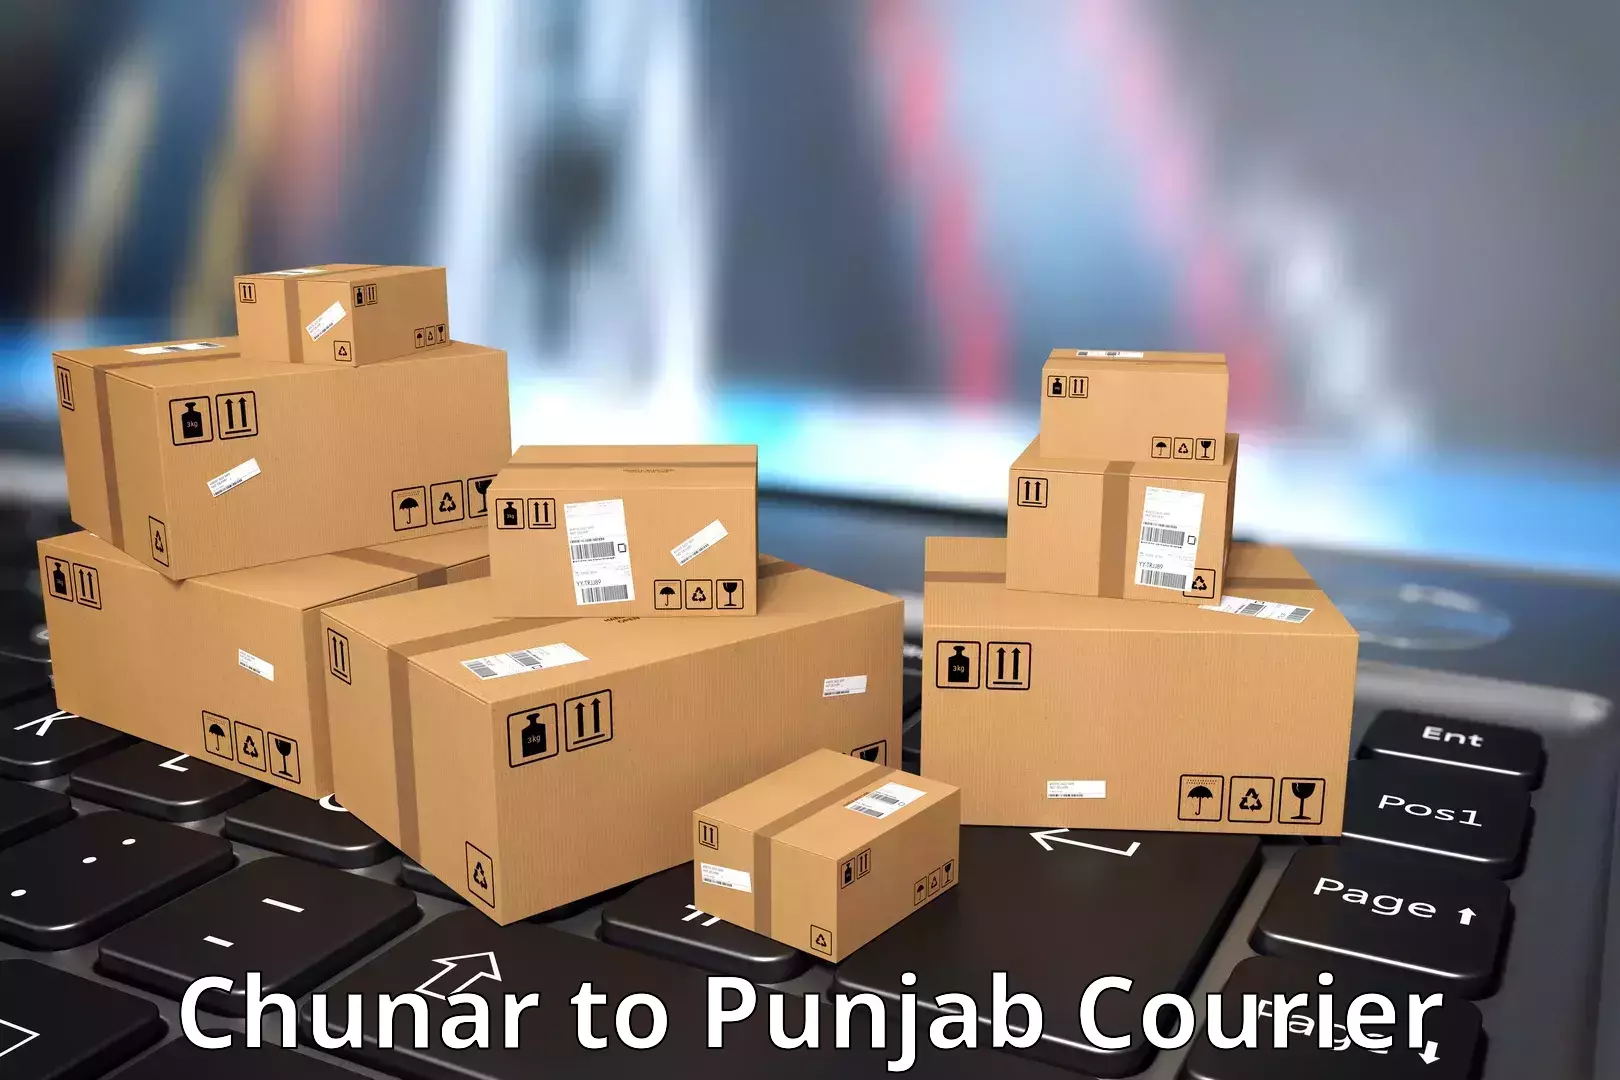 Cargo delivery service Chunar to Punjab